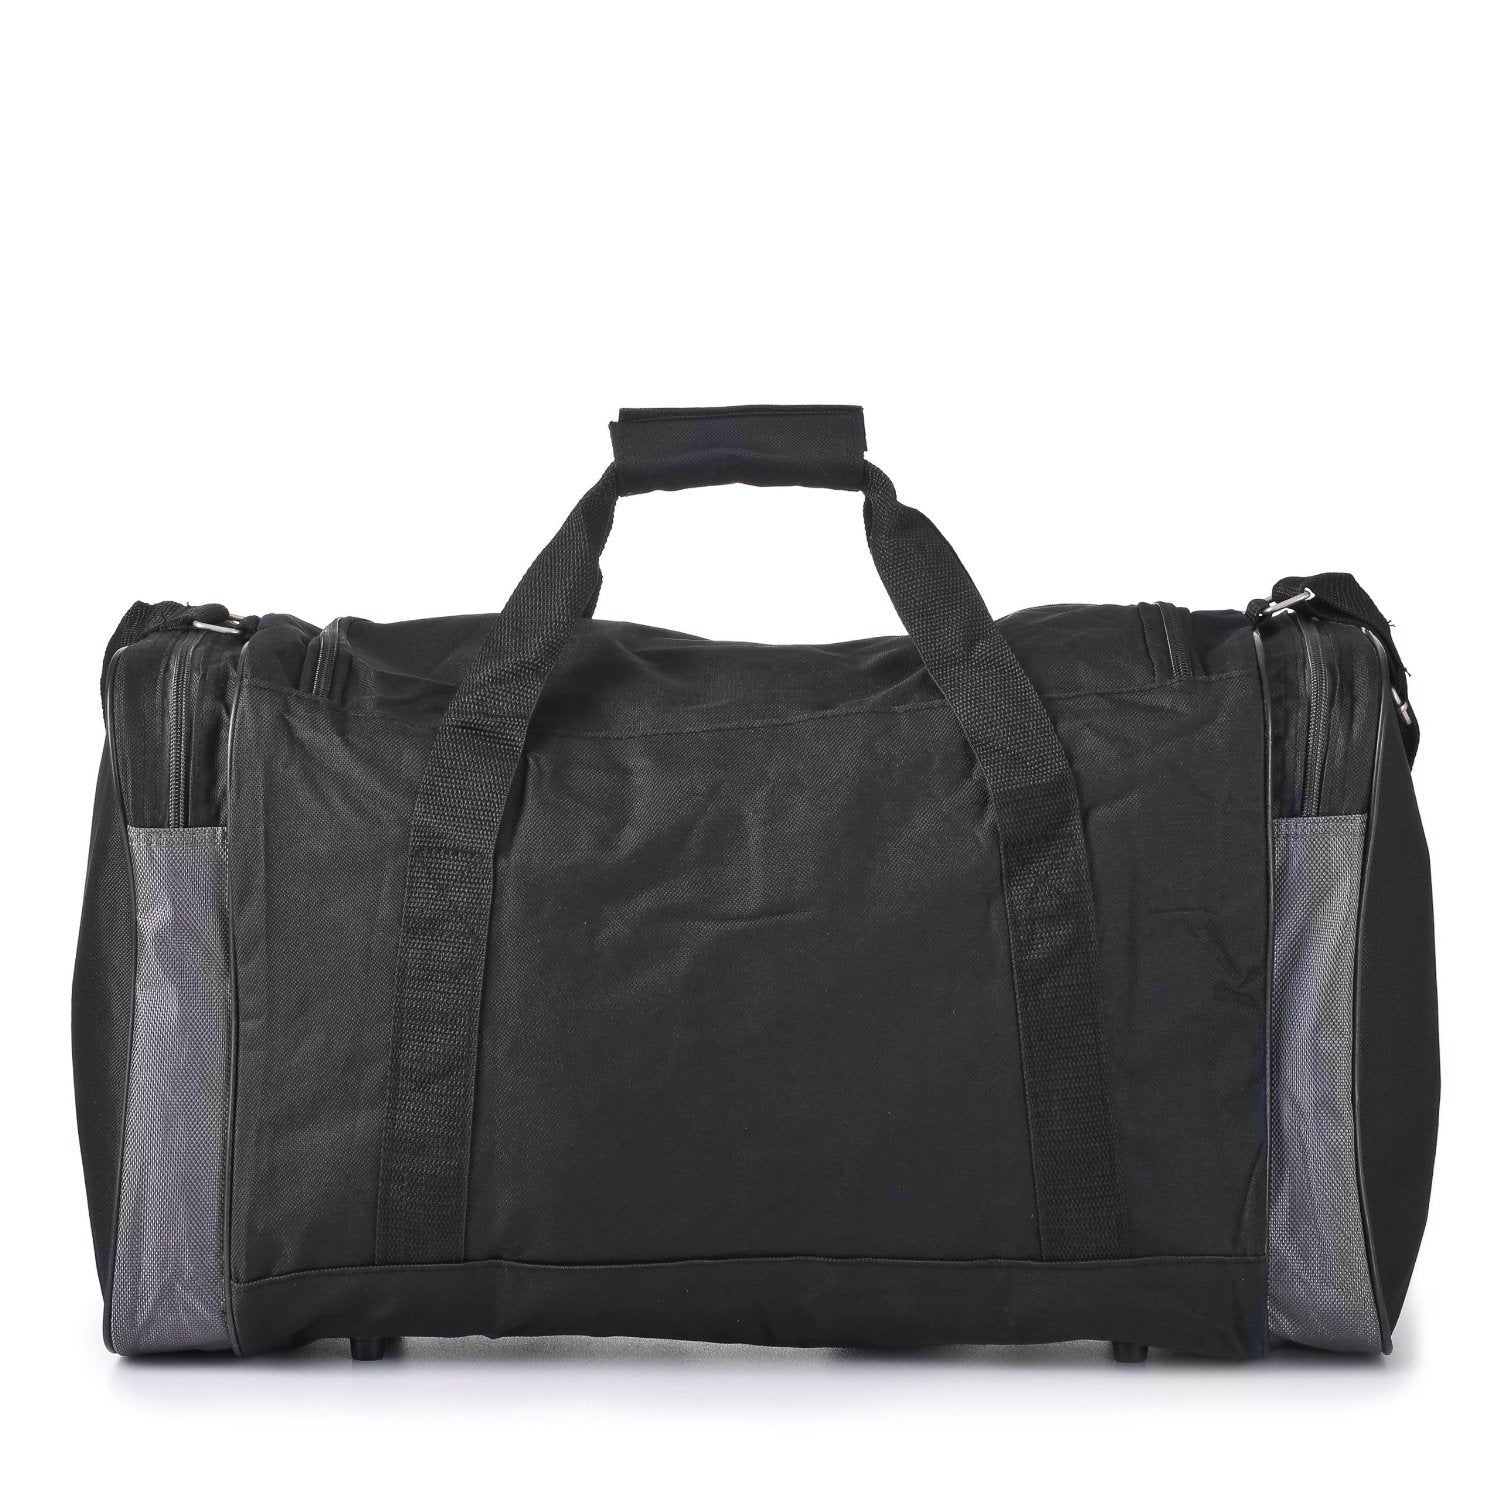 5 Cities Lightweight Hand Luggage Cabin Sized Sports Duffel Holdall (Black 330)